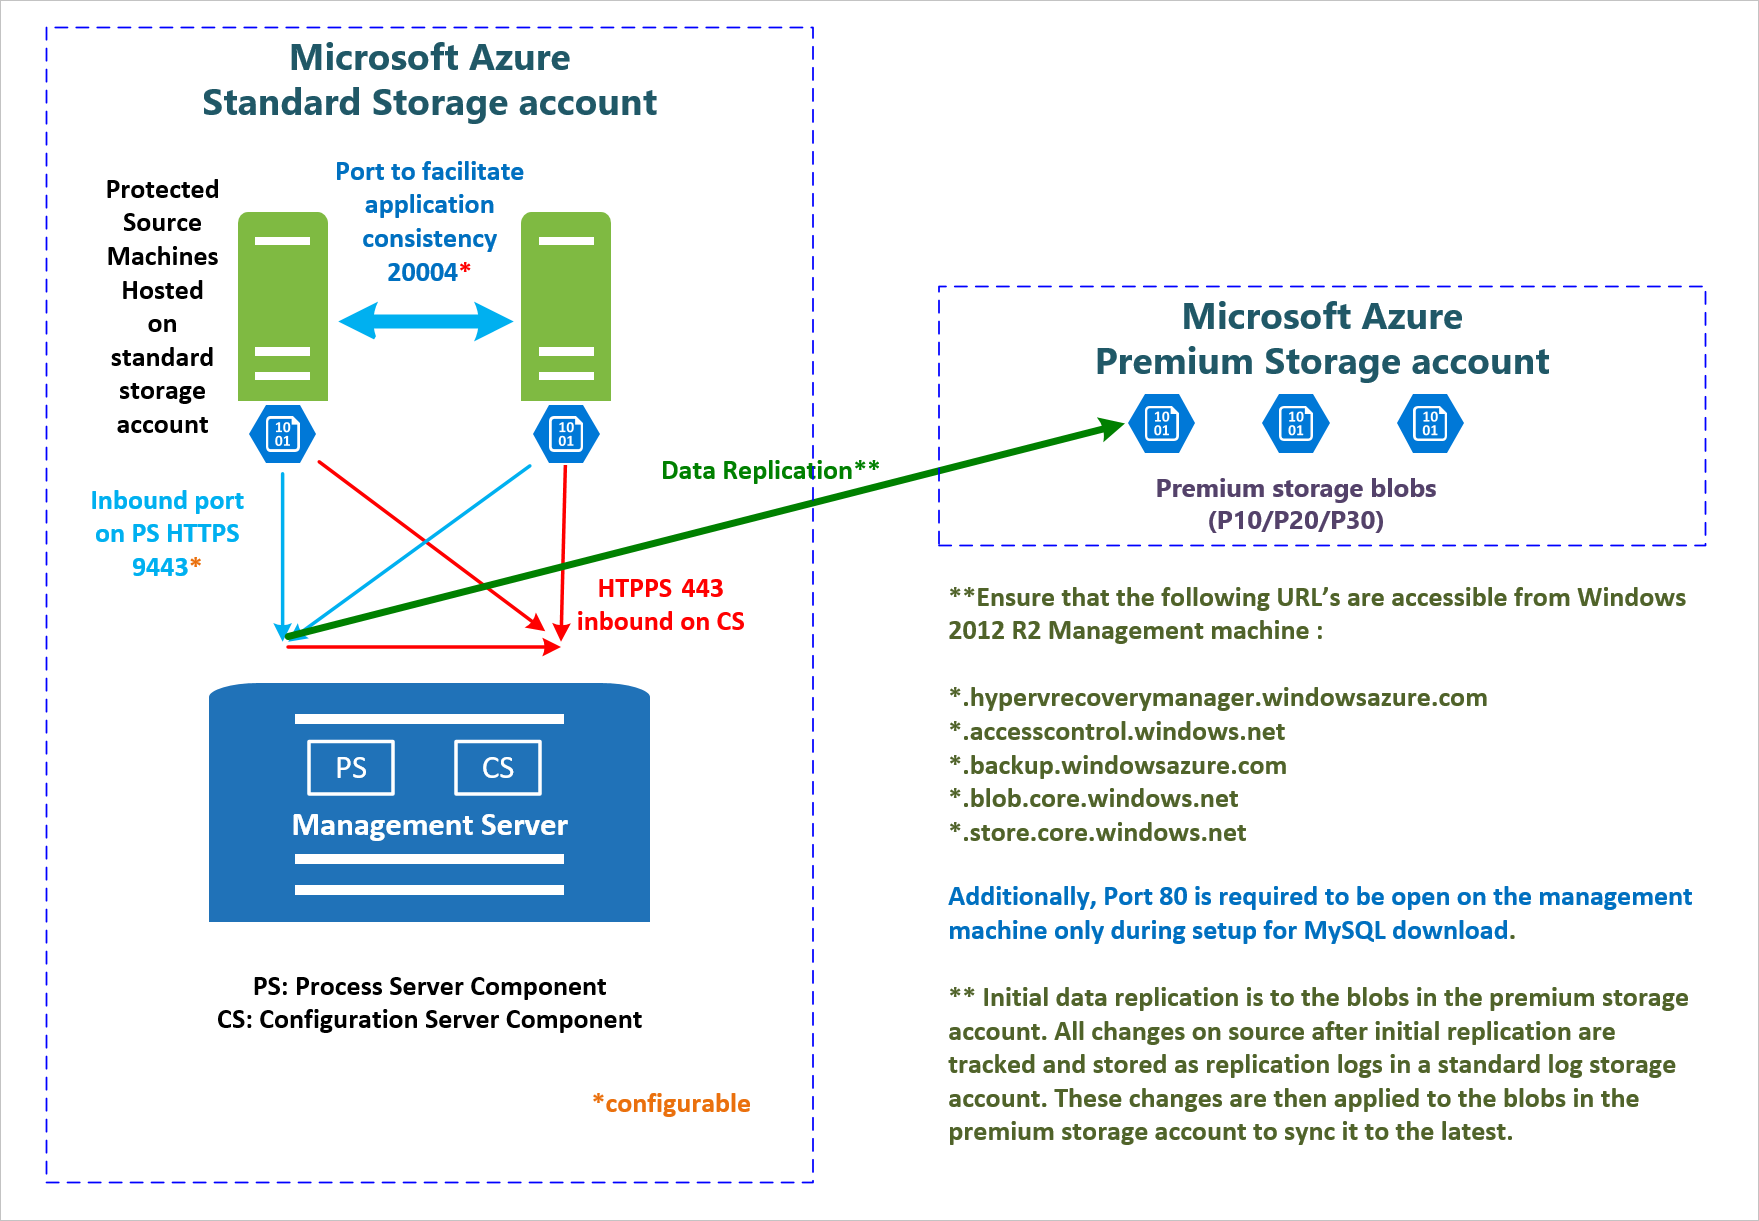 Migrate your Windows VMs to Azure Premium Storage with ...